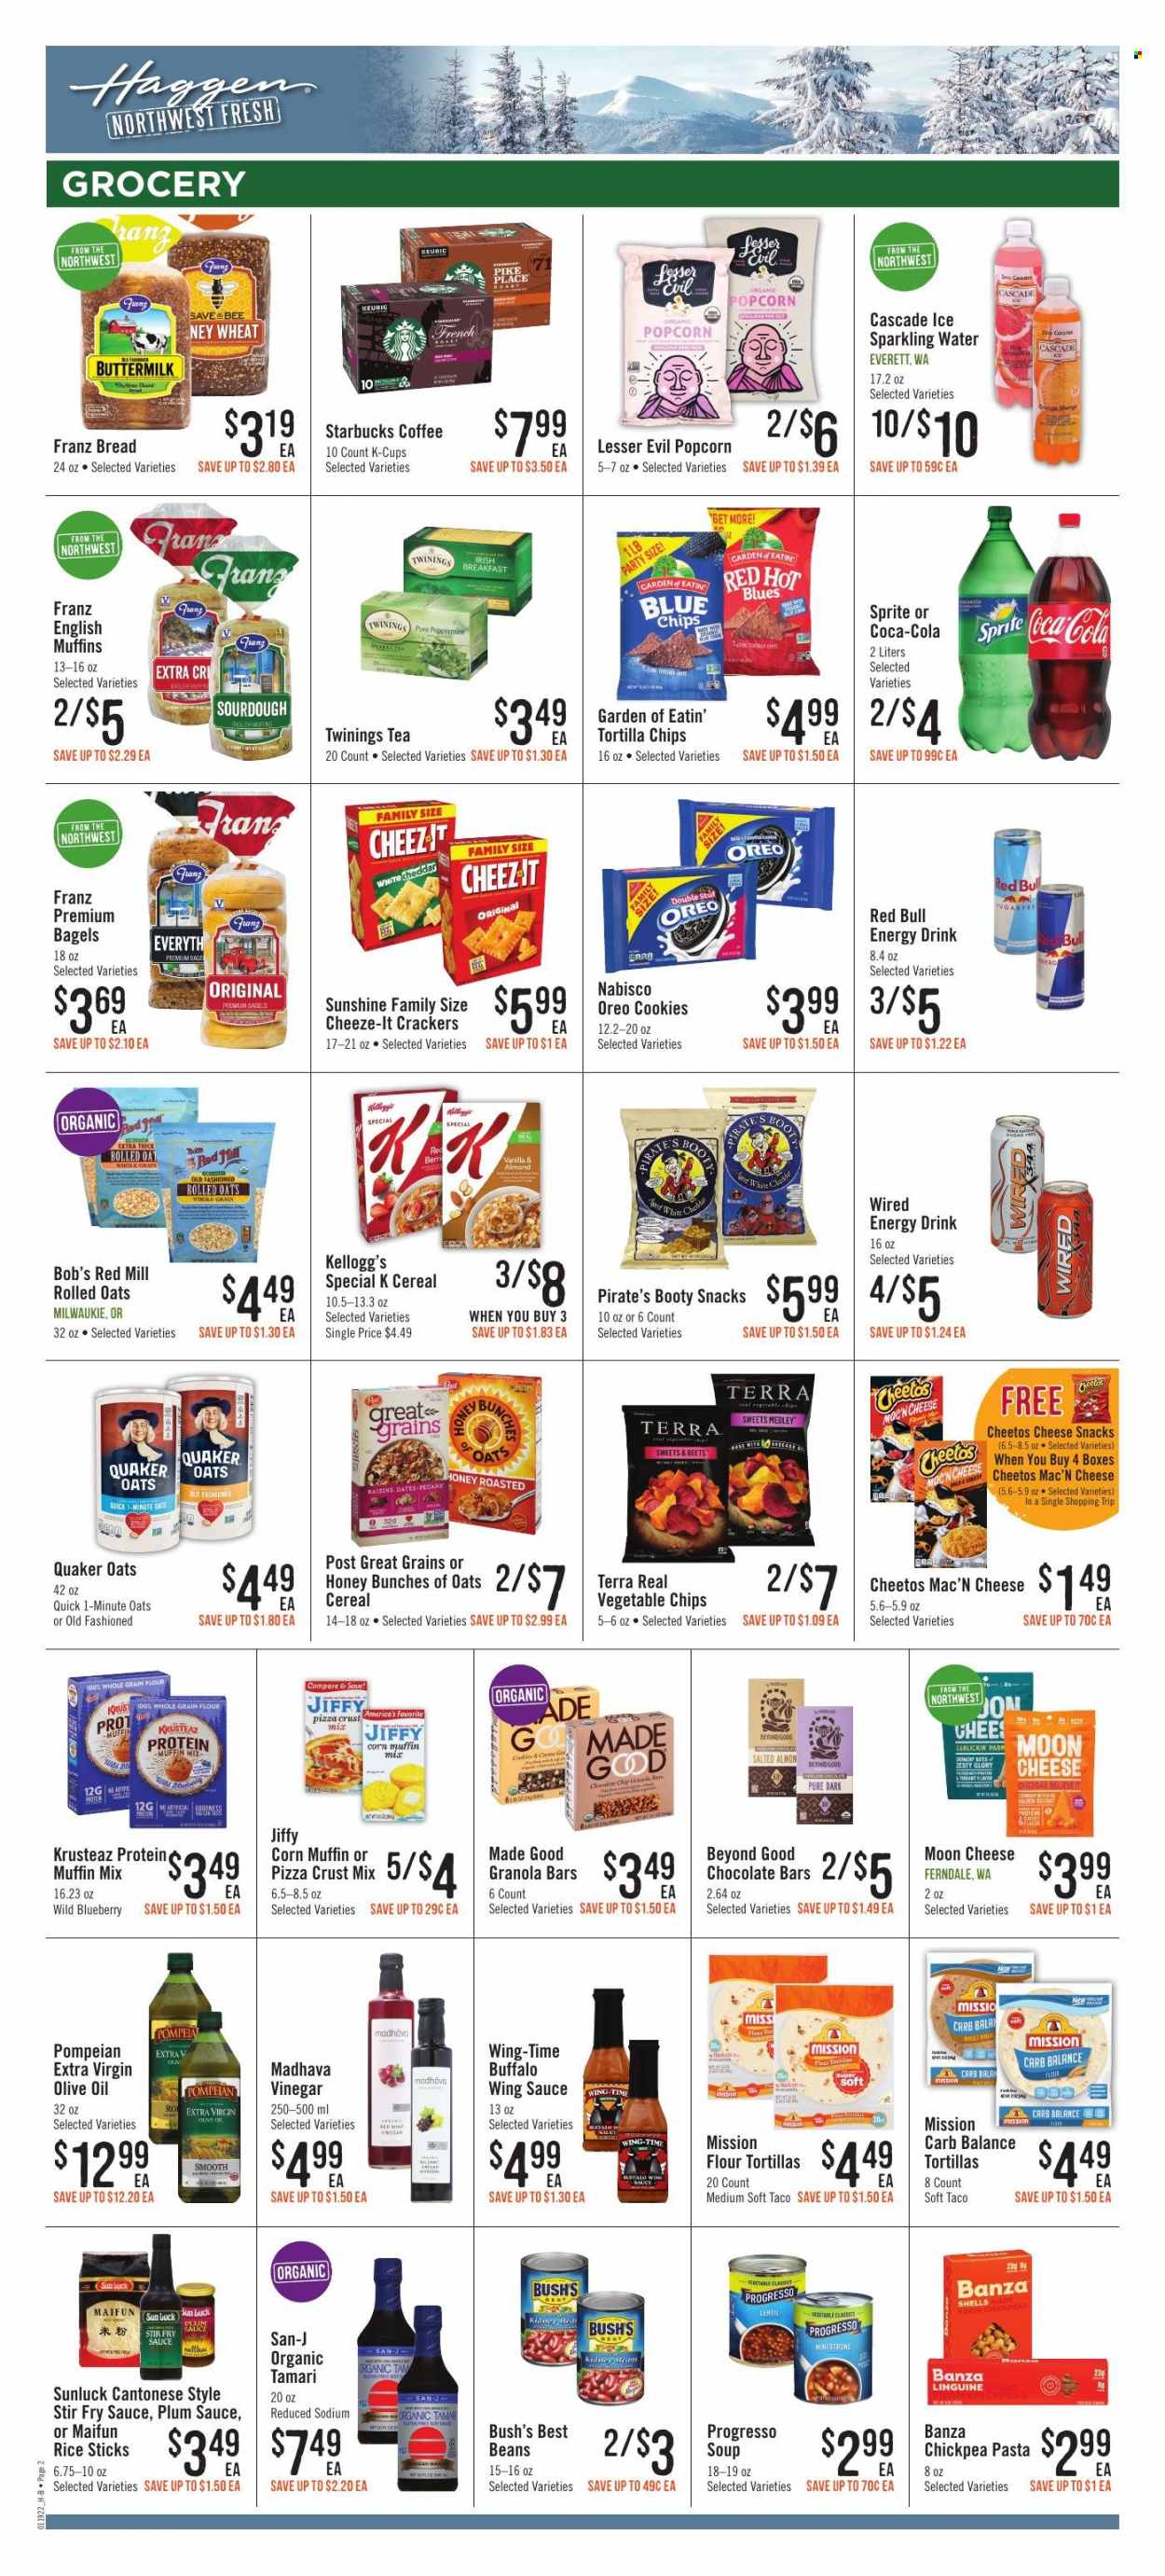 thumbnail - Haggen Flyer - 01/19/2022 - 02/01/2022 - Sales products - bagels, bread, english muffins, flour tortillas, muffin mix, corn, eel, pizza, pasta, Quaker, Progresso, Oreo, buttermilk, Sunshine, cookies, snack, crackers, Kellogg's, chocolate bar, tortilla chips, Cheetos, chips, popcorn, vegetable chips, corn muffin, cereals, rolled oats, granola bar, rice, wing sauce, extra virgin olive oil, olive oil, oil, raisins, pecans, Coca-Cola, Sprite, energy drink, Red Bull, sparkling water, tea, Twinings, coffee, Starbucks, coffee capsules, K-Cups, Keurig, Cascade, Jiffy. Page 2.